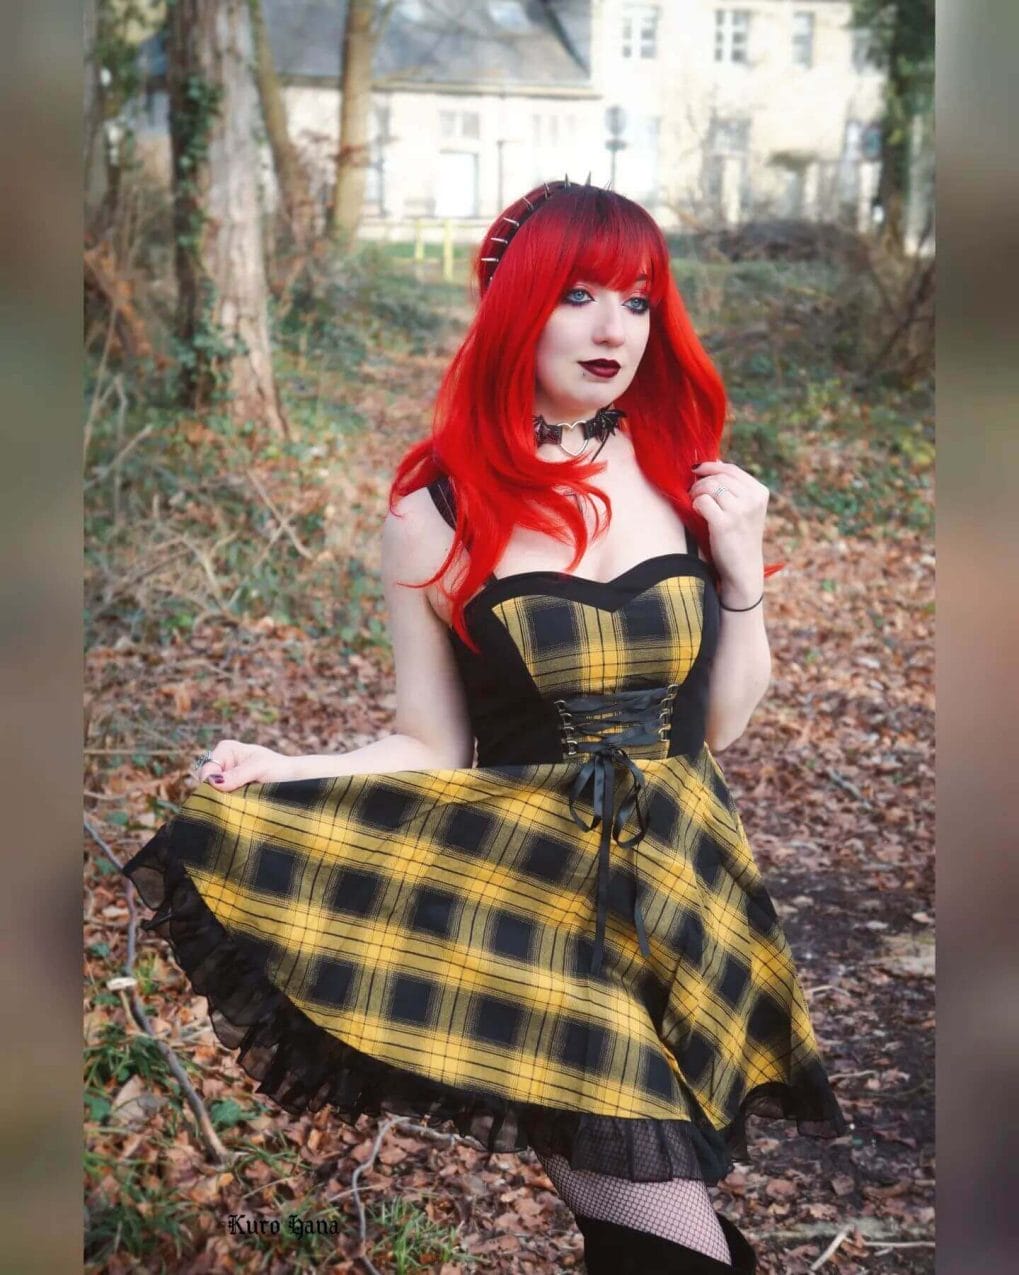 Bright red hair with spike headband and blunt bangs and gothic vibe